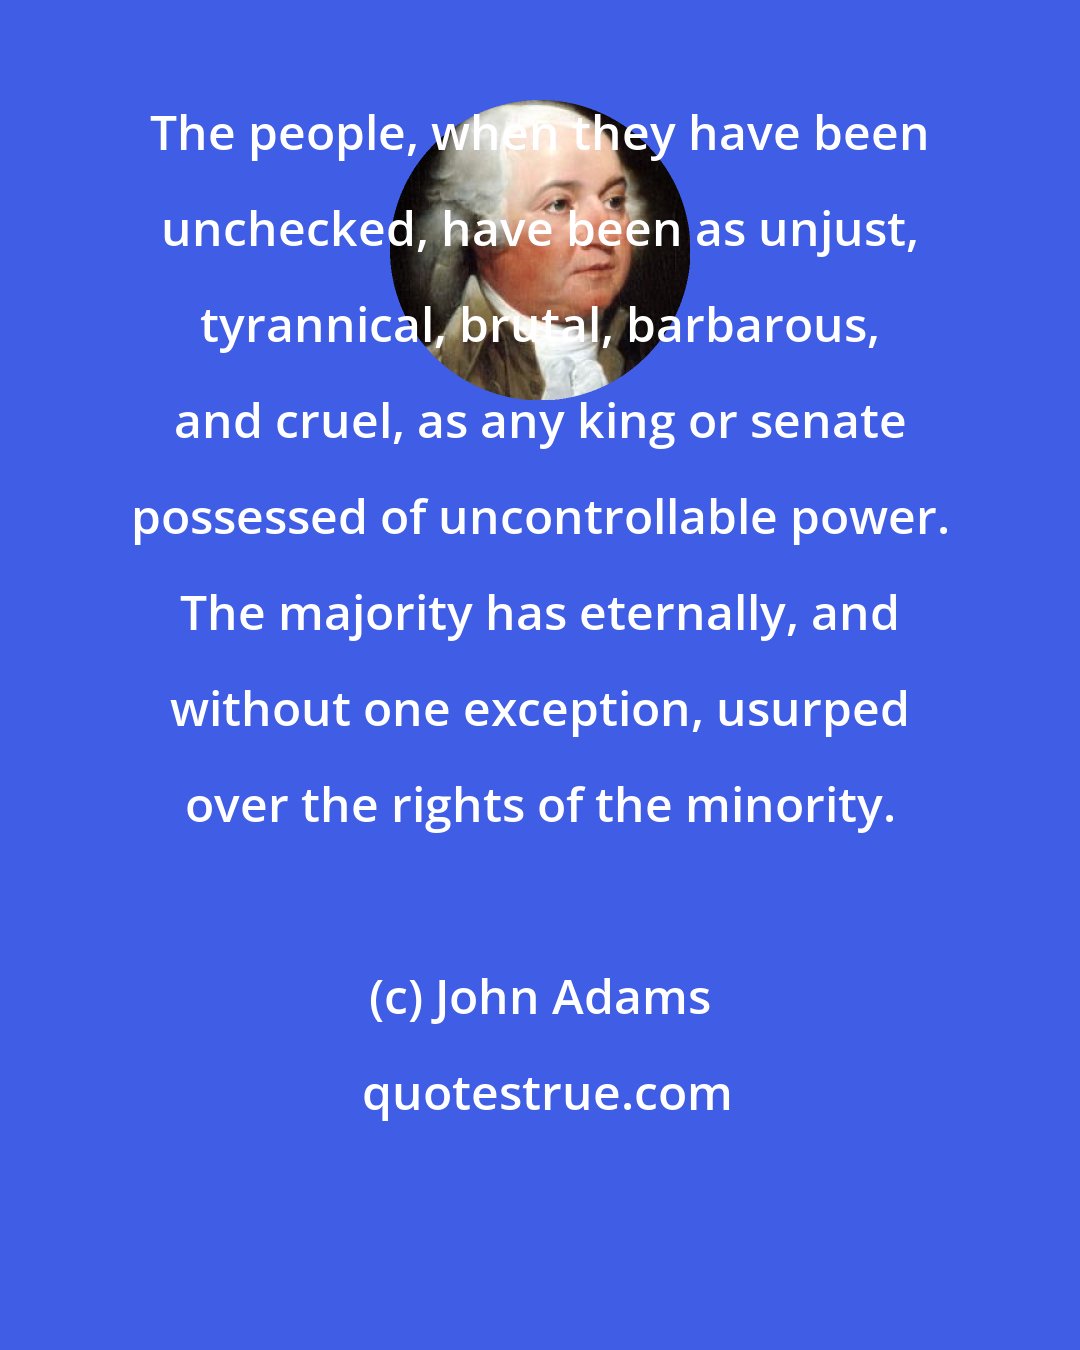 John Adams: The people, when they have been unchecked, have been as unjust, tyrannical, brutal, barbarous, and cruel, as any king or senate possessed of uncontrollable power. The majority has eternally, and without one exception, usurped over the rights of the minority.